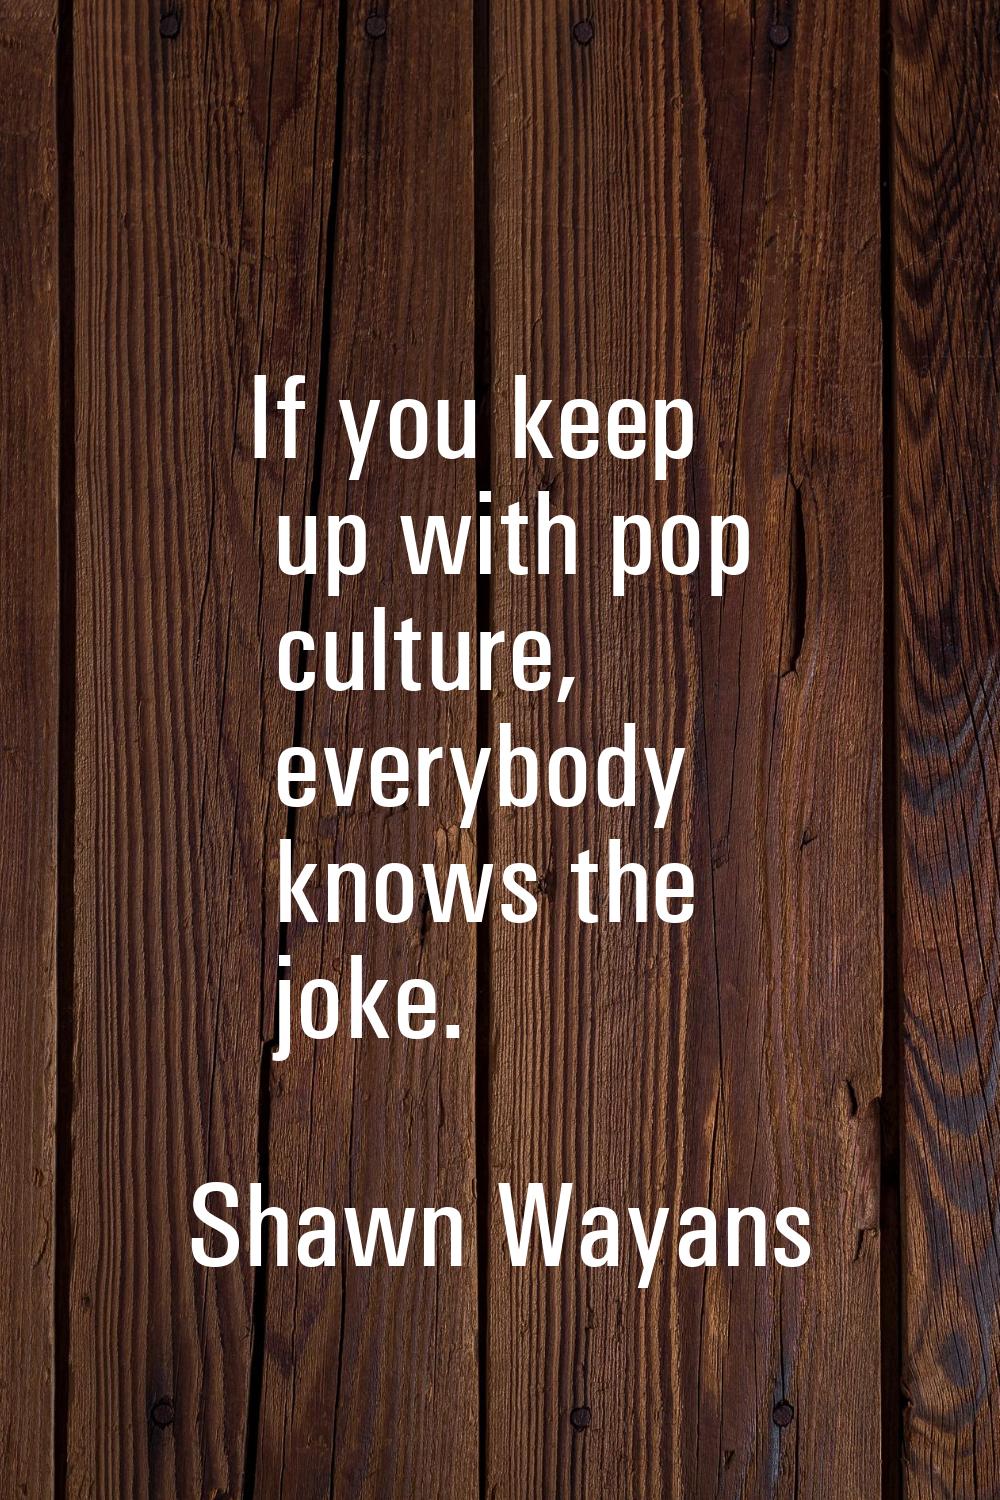 If you keep up with pop culture, everybody knows the joke.